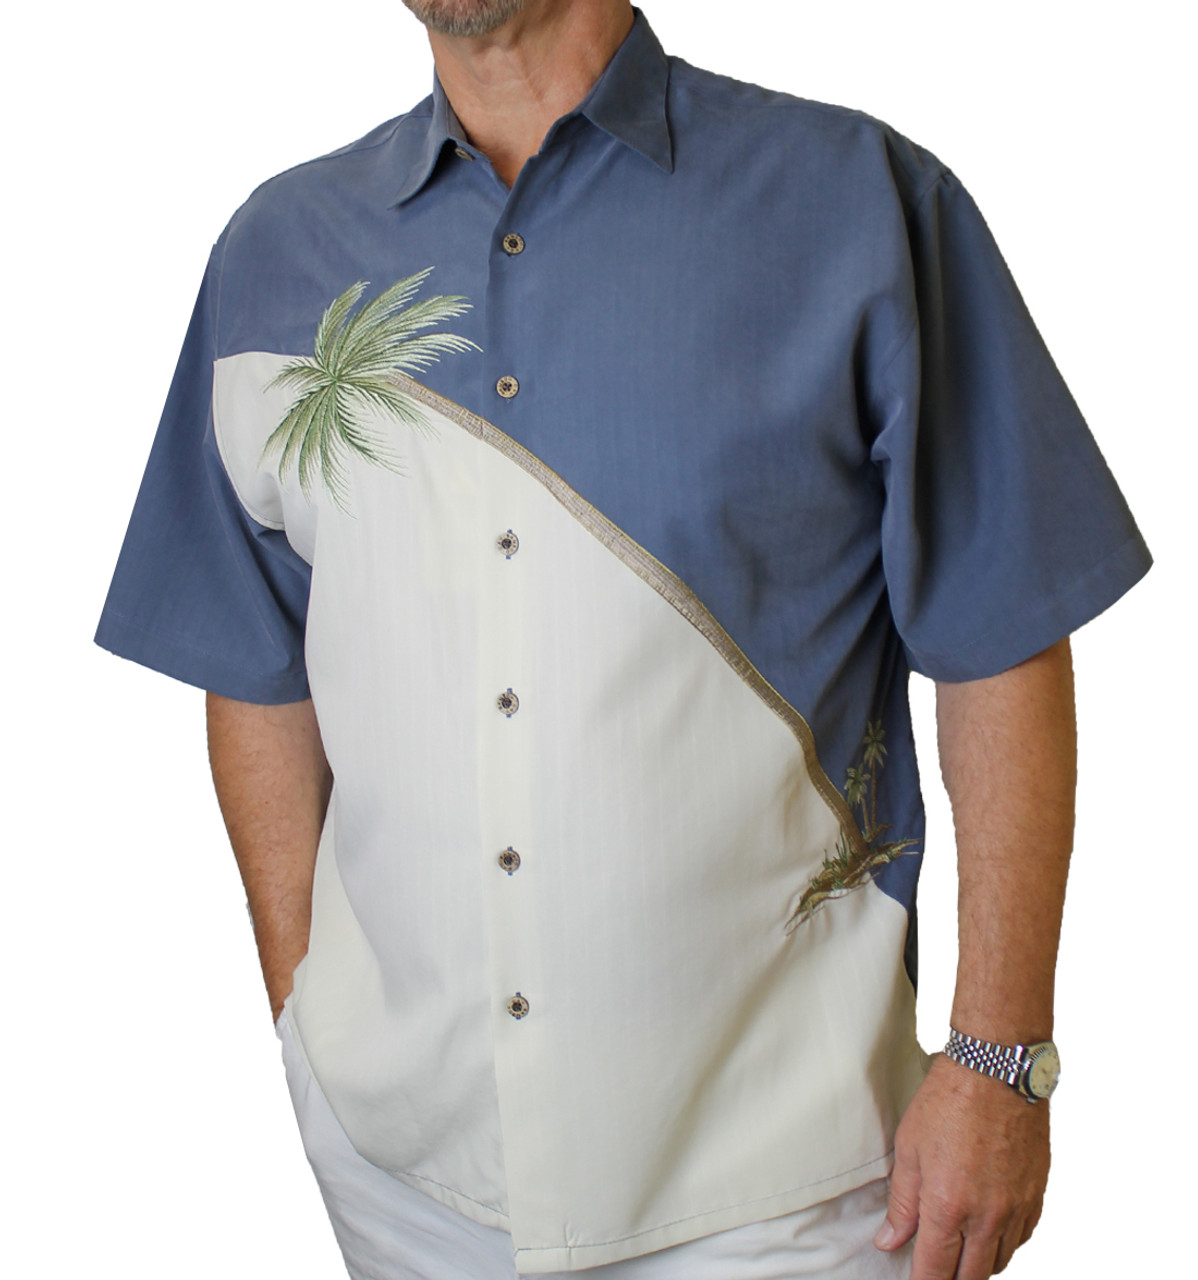 Hurricane Palm Embroidered Polynosic Camp Shirt by Bamboo Cay - Infra Blue  WB80R